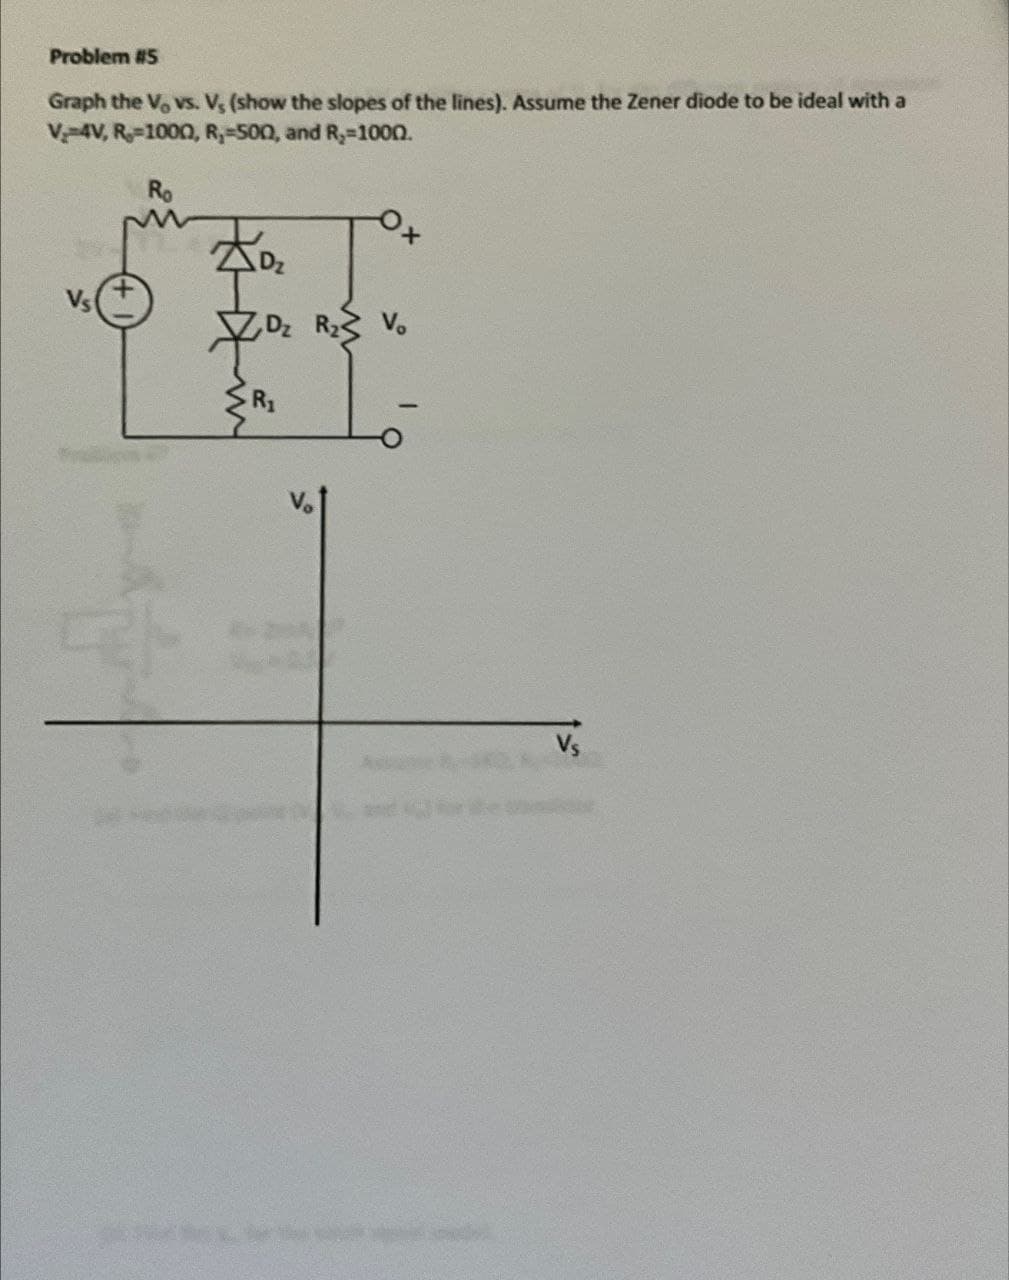 Problem #5
Graph the Vo vs. V, (show the slopes of the lines). Assume the Zener diode to be ideal with a
V-4V, R-1000, R,-500, and R,-1000.
Ro
+
Vs
Dz Rz Vo
O
-
Vs